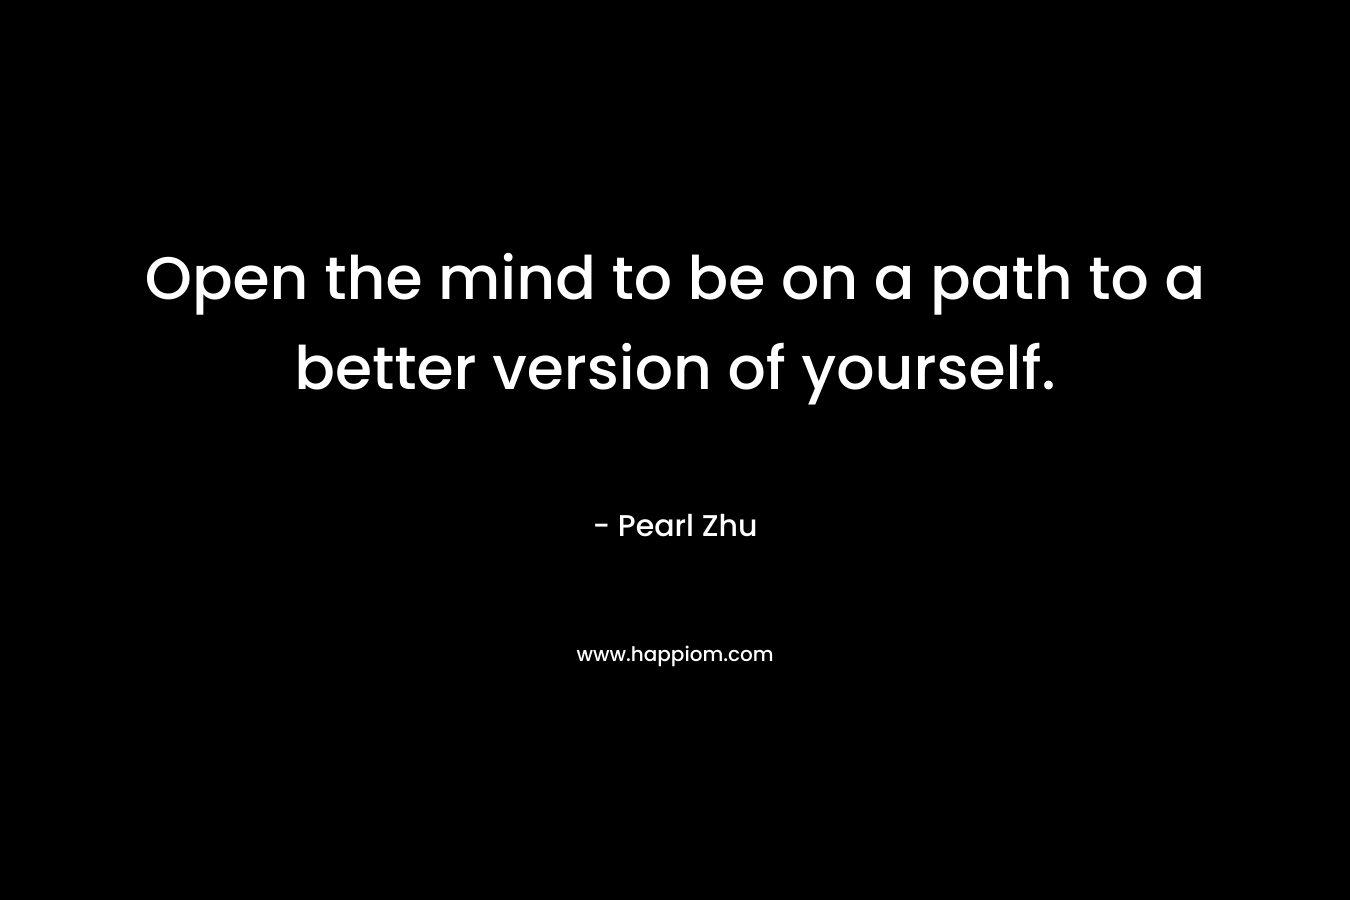 Open the mind to be on a path to a better version of yourself.